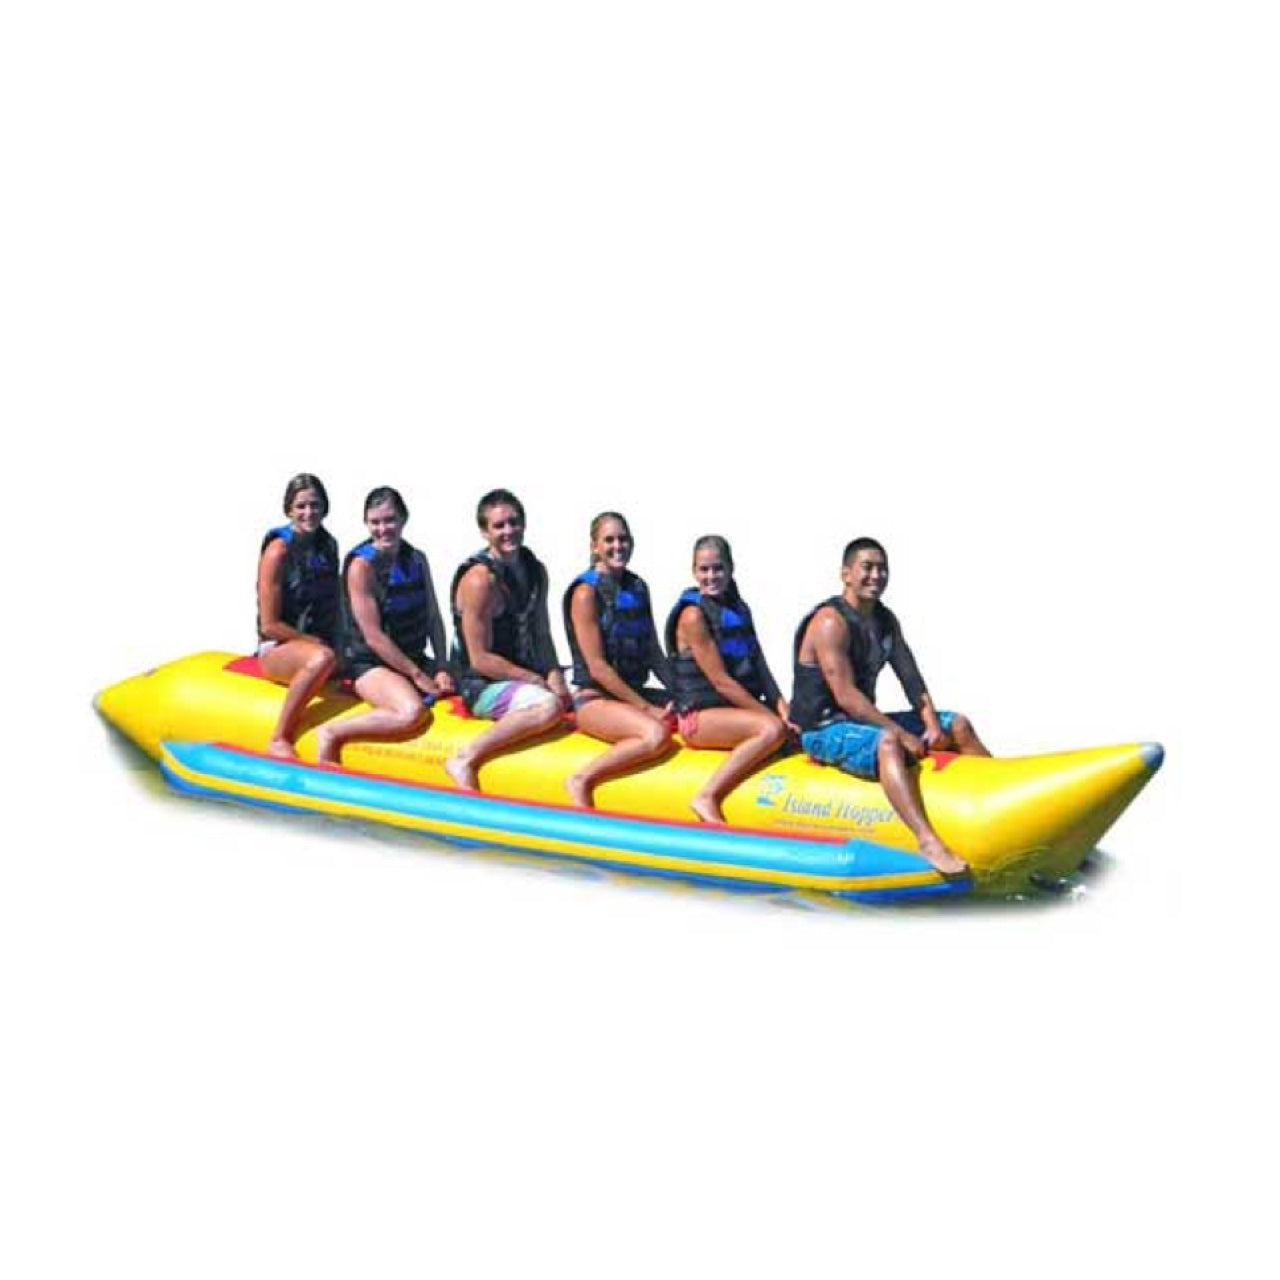 Island Hopper 6 Person Banana Boat Tube side view. Yellow inner tube with 6 passengers. Image on a white background.